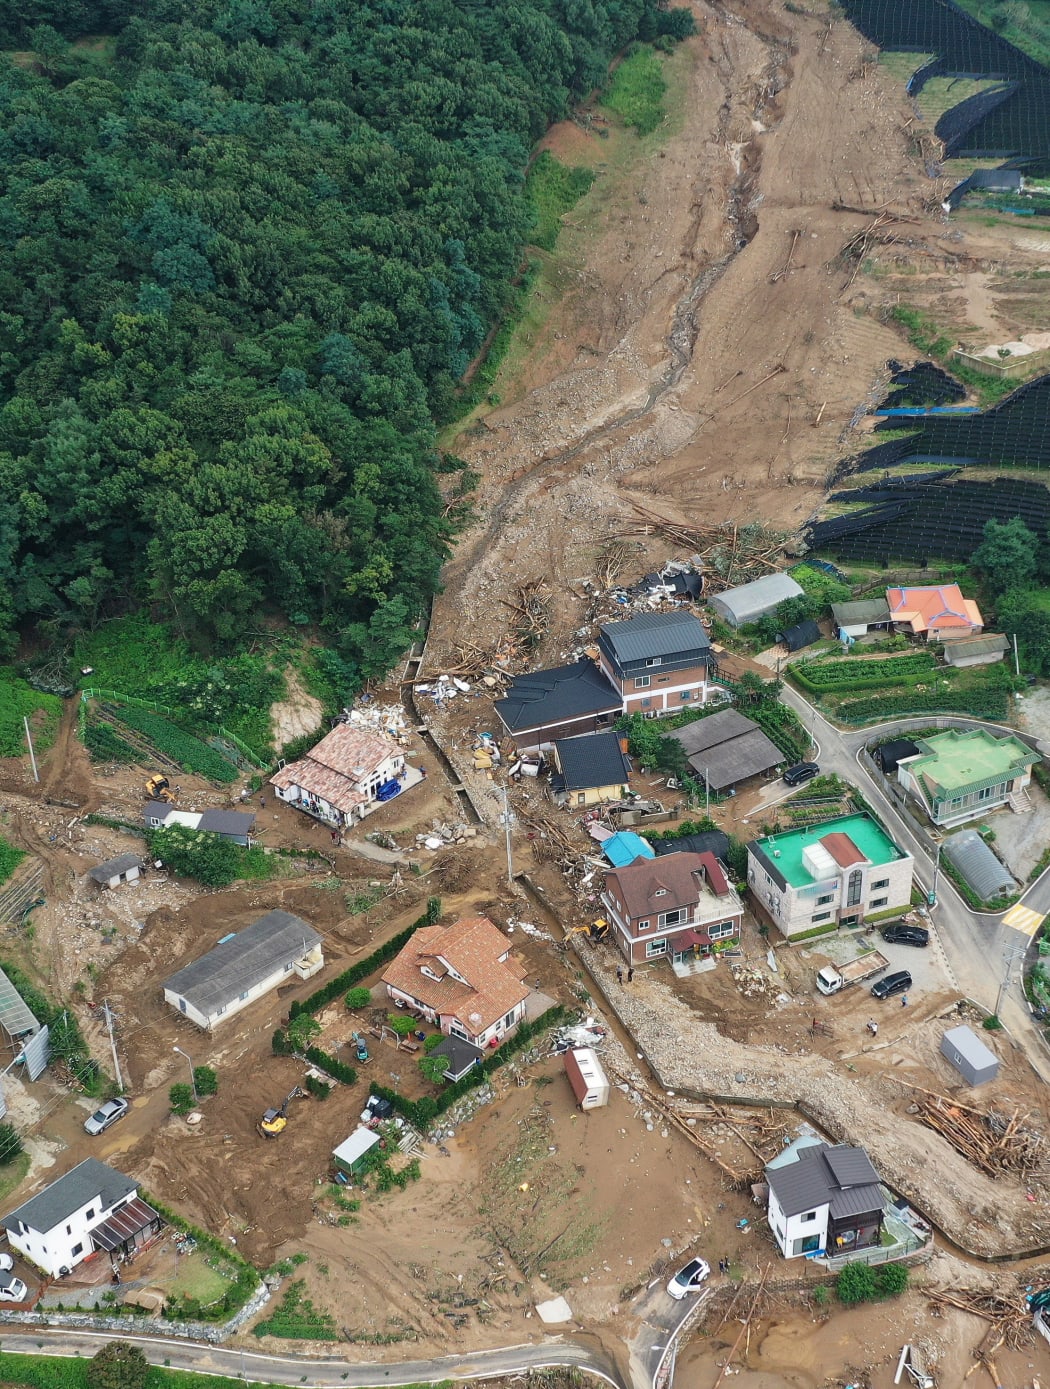 An aerial view shows a damage to a village following a landslide amid heavy rain in the village of Juksan-myeon, near Anseong on August 4, 2020. -